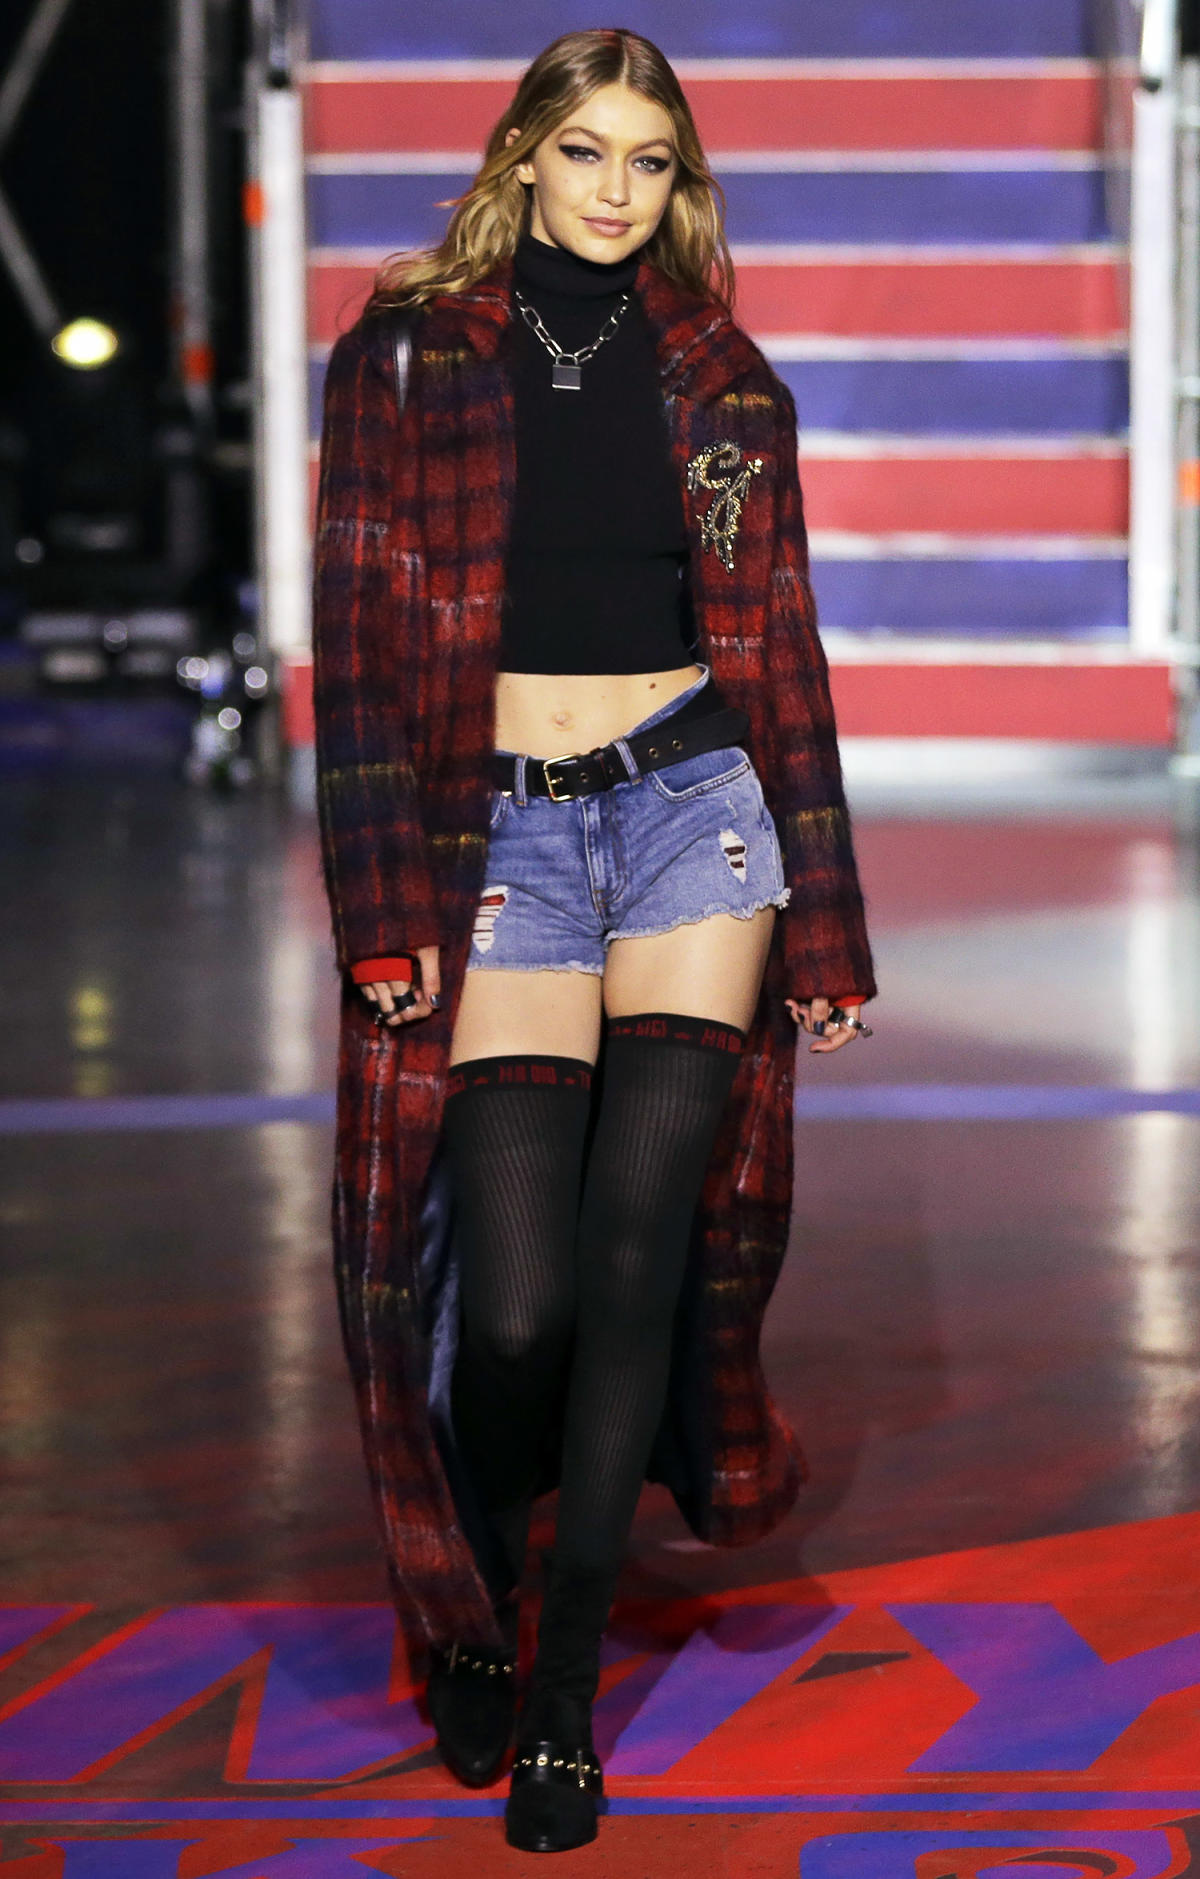 Gigi Hadid's Hilfiger Line Has Arrived: Here's What You'll Actually Wear